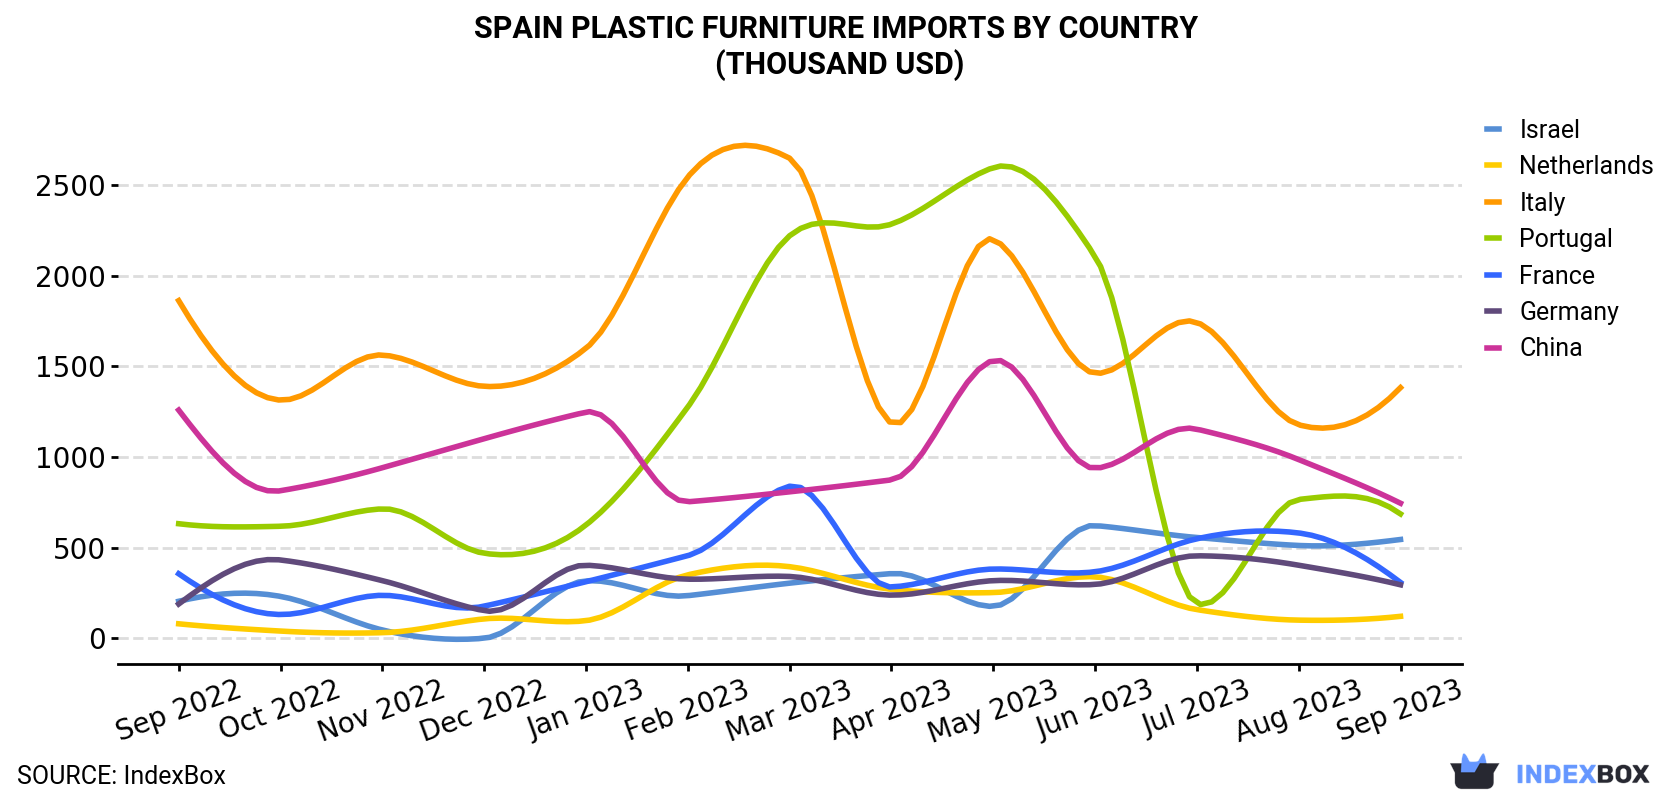 Spain Plastic Furniture Imports By Country (Thousand USD)